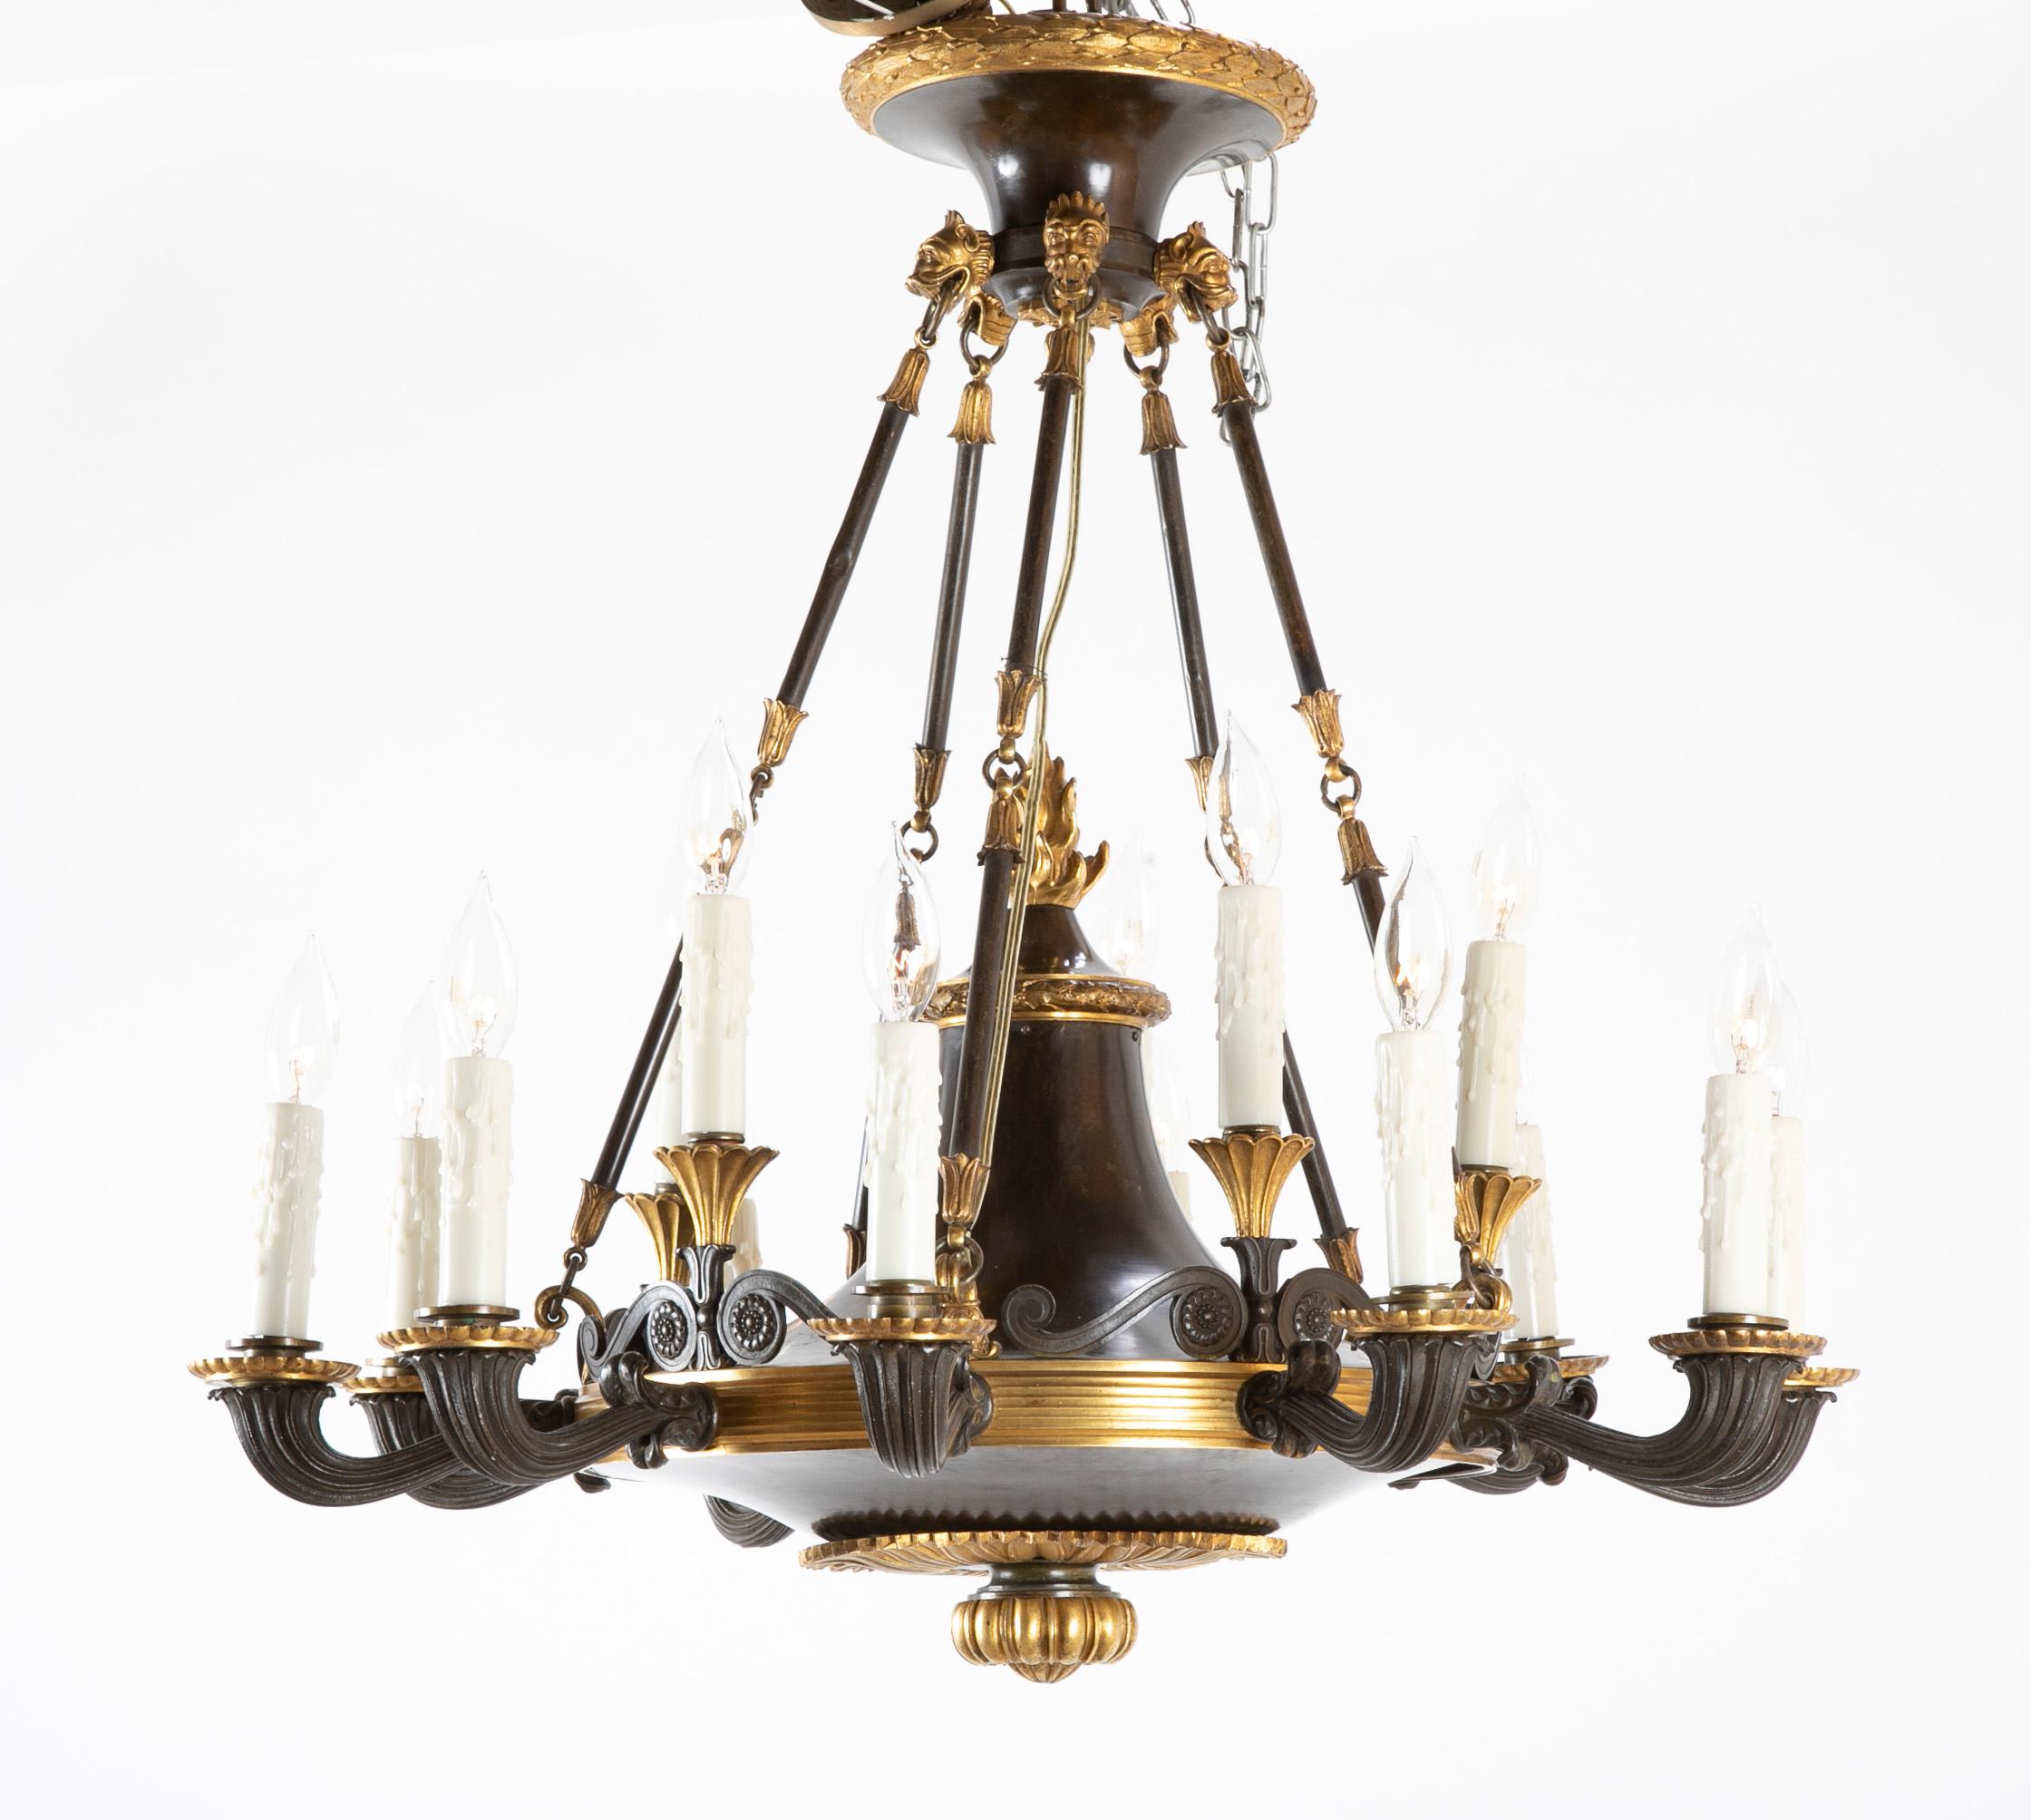 An English Regency patinated and gilt bronze 15 light chandelier from the first quarter of the 19th century.

 